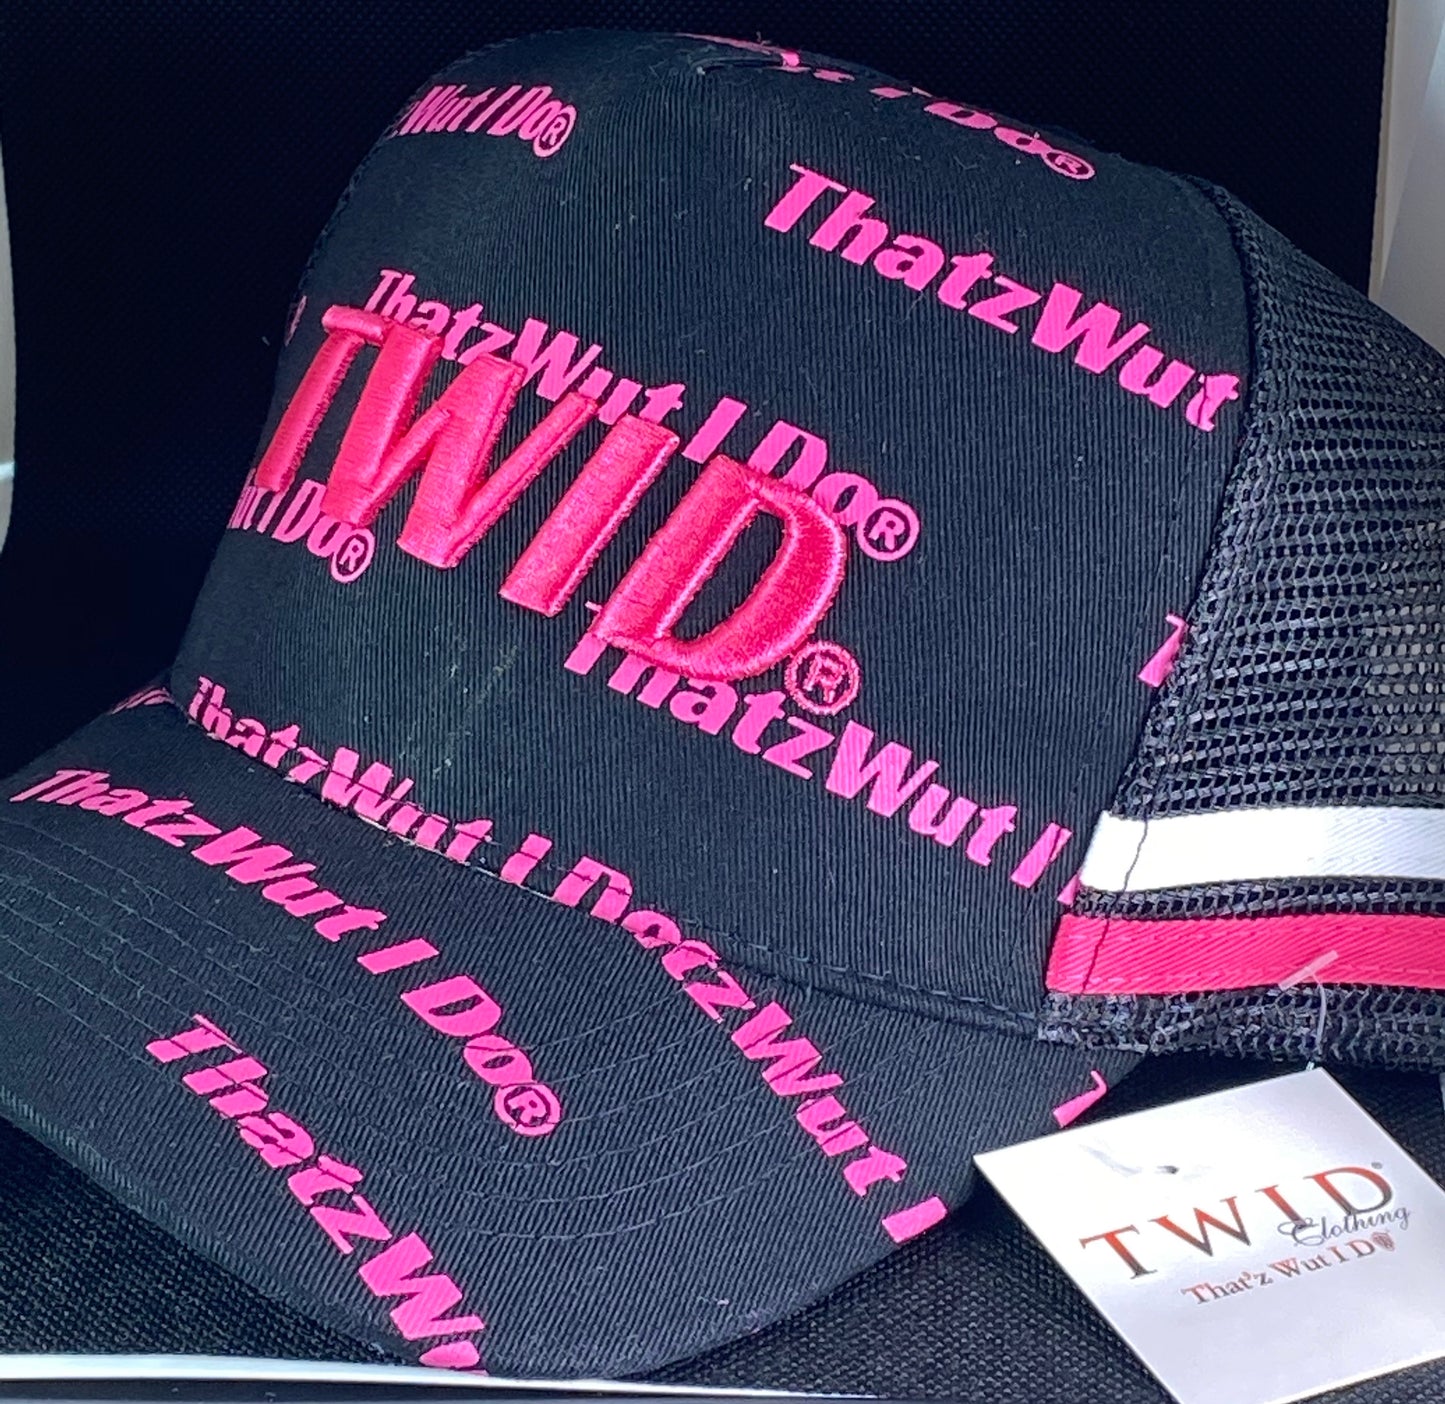 Twid  3D Embroidered Caps